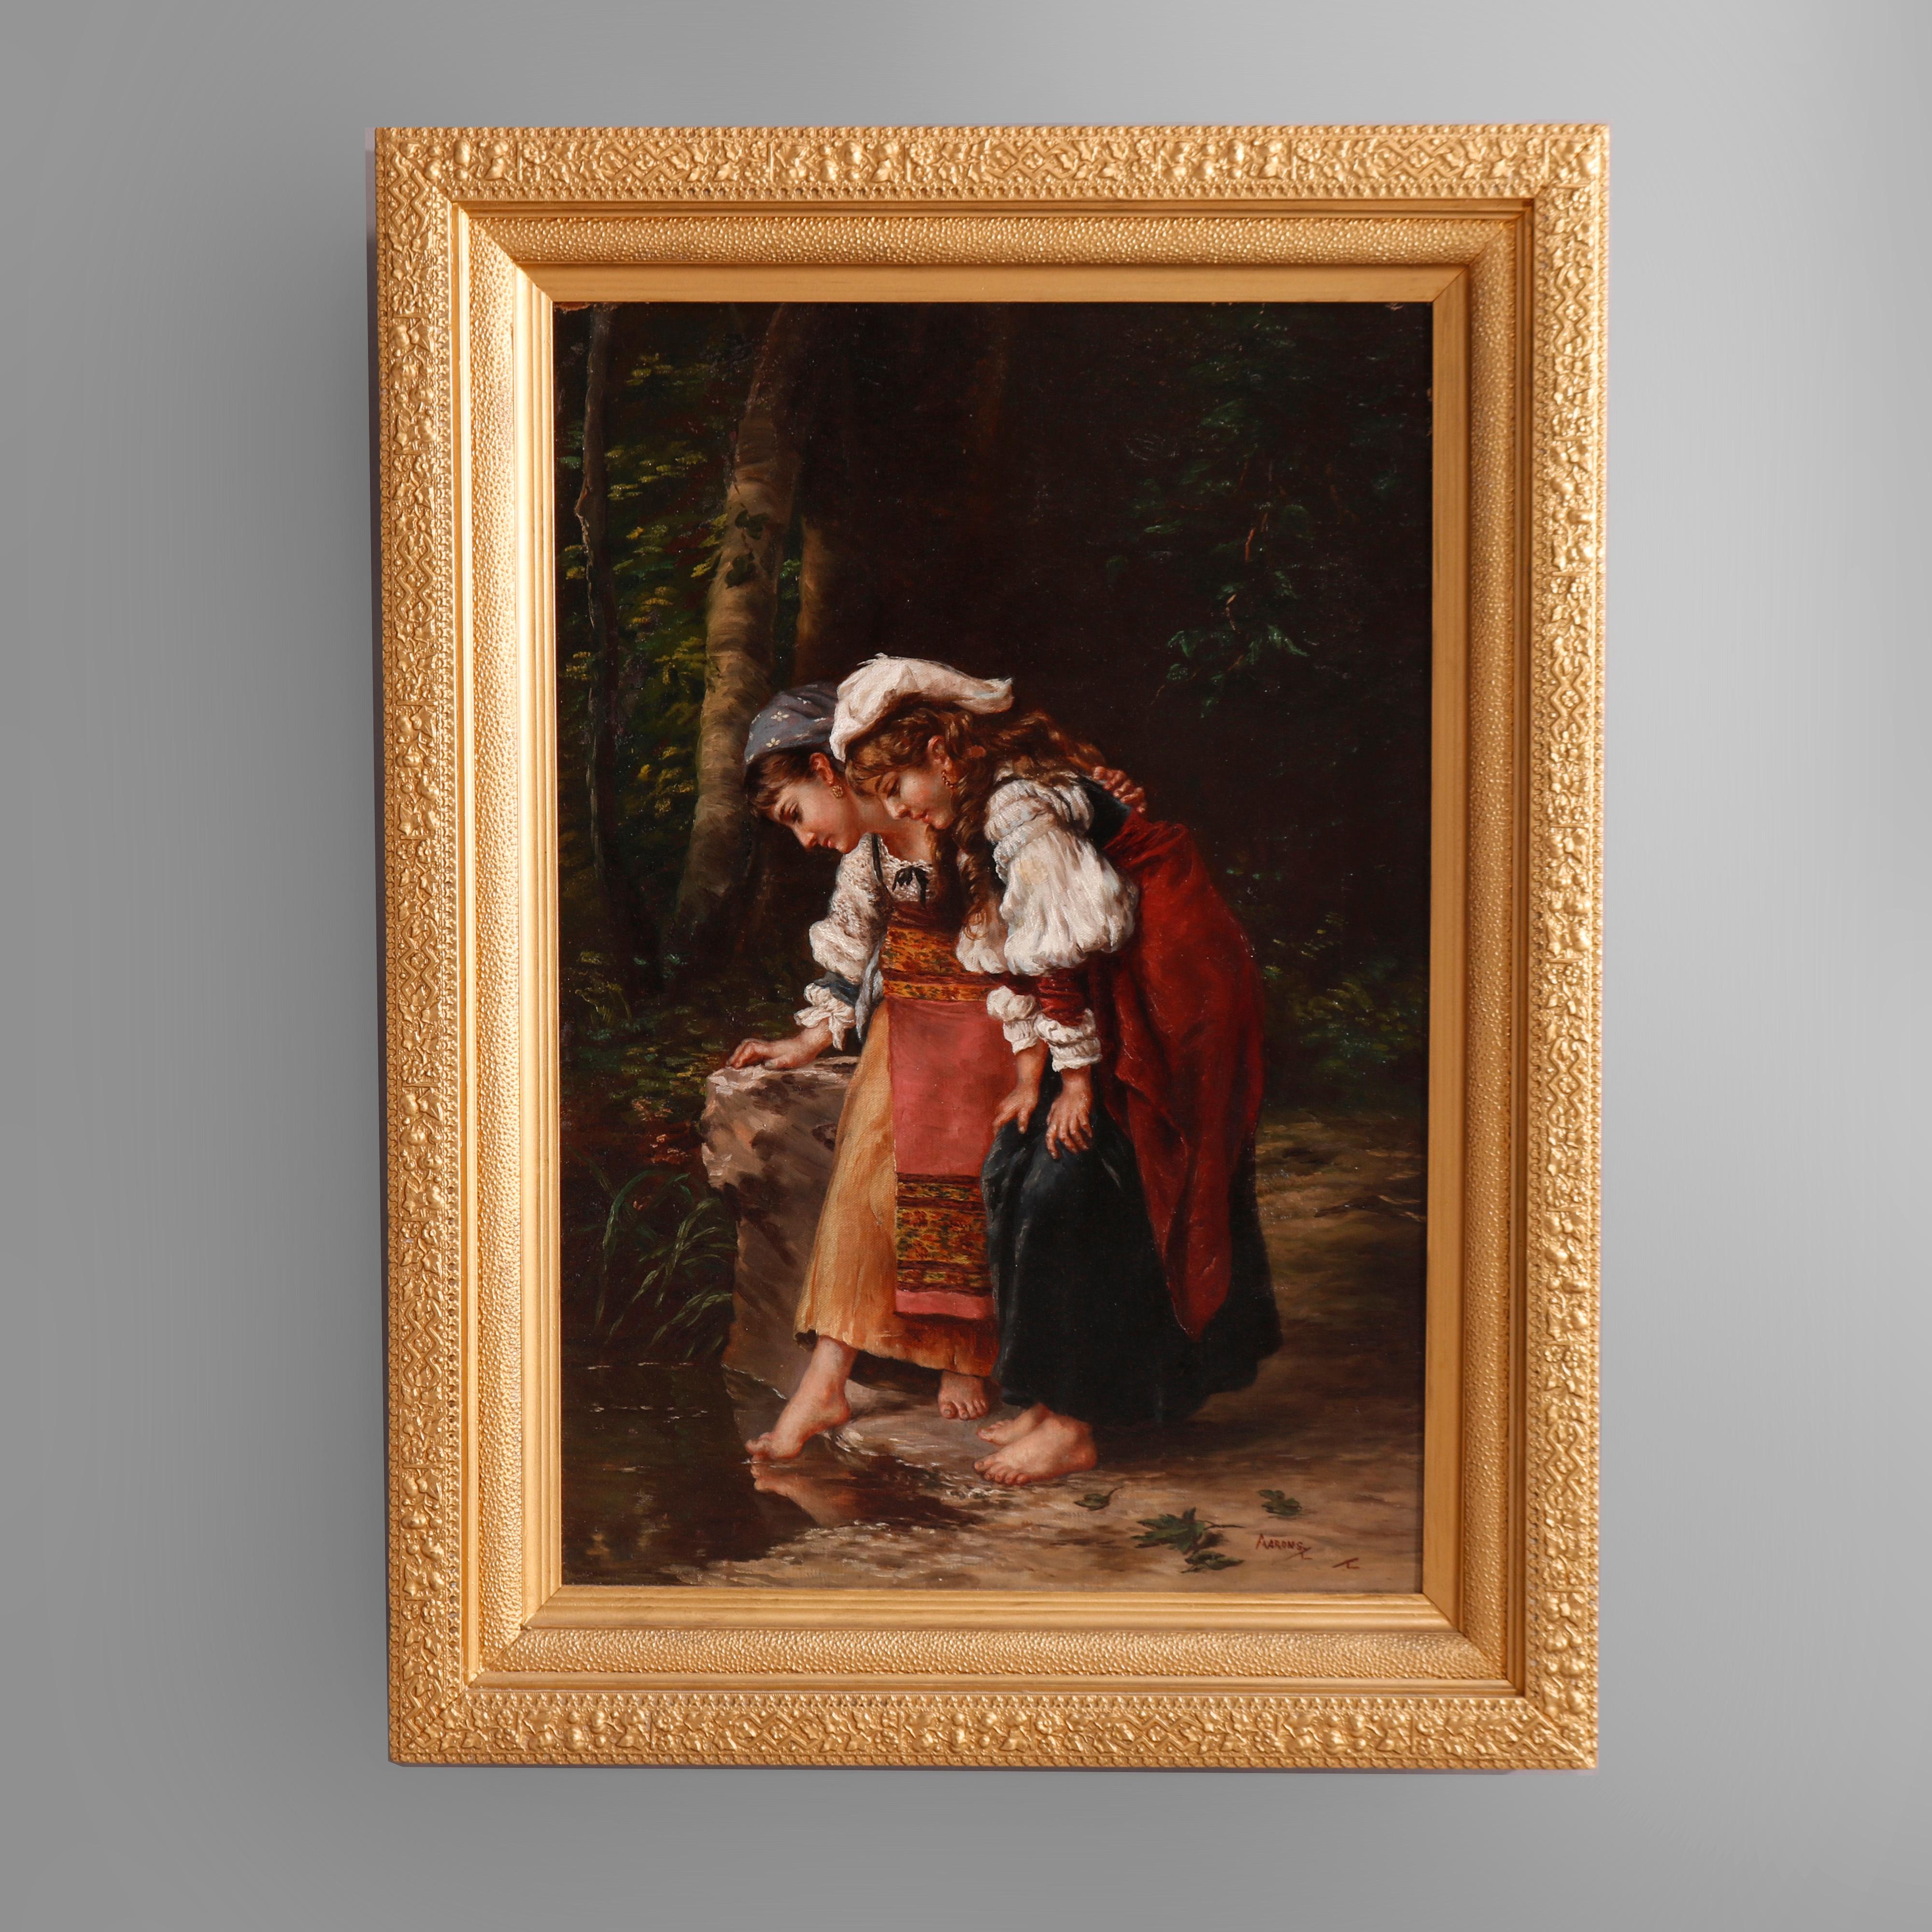 An antique Continental painting by Aarons offers oil on canvas genre scene having two young girls at a creek in country side setting, seated in giltwood frame, artist signed lower right as photographed, c1890

Measures - Overall 33''H X 24.5''W X